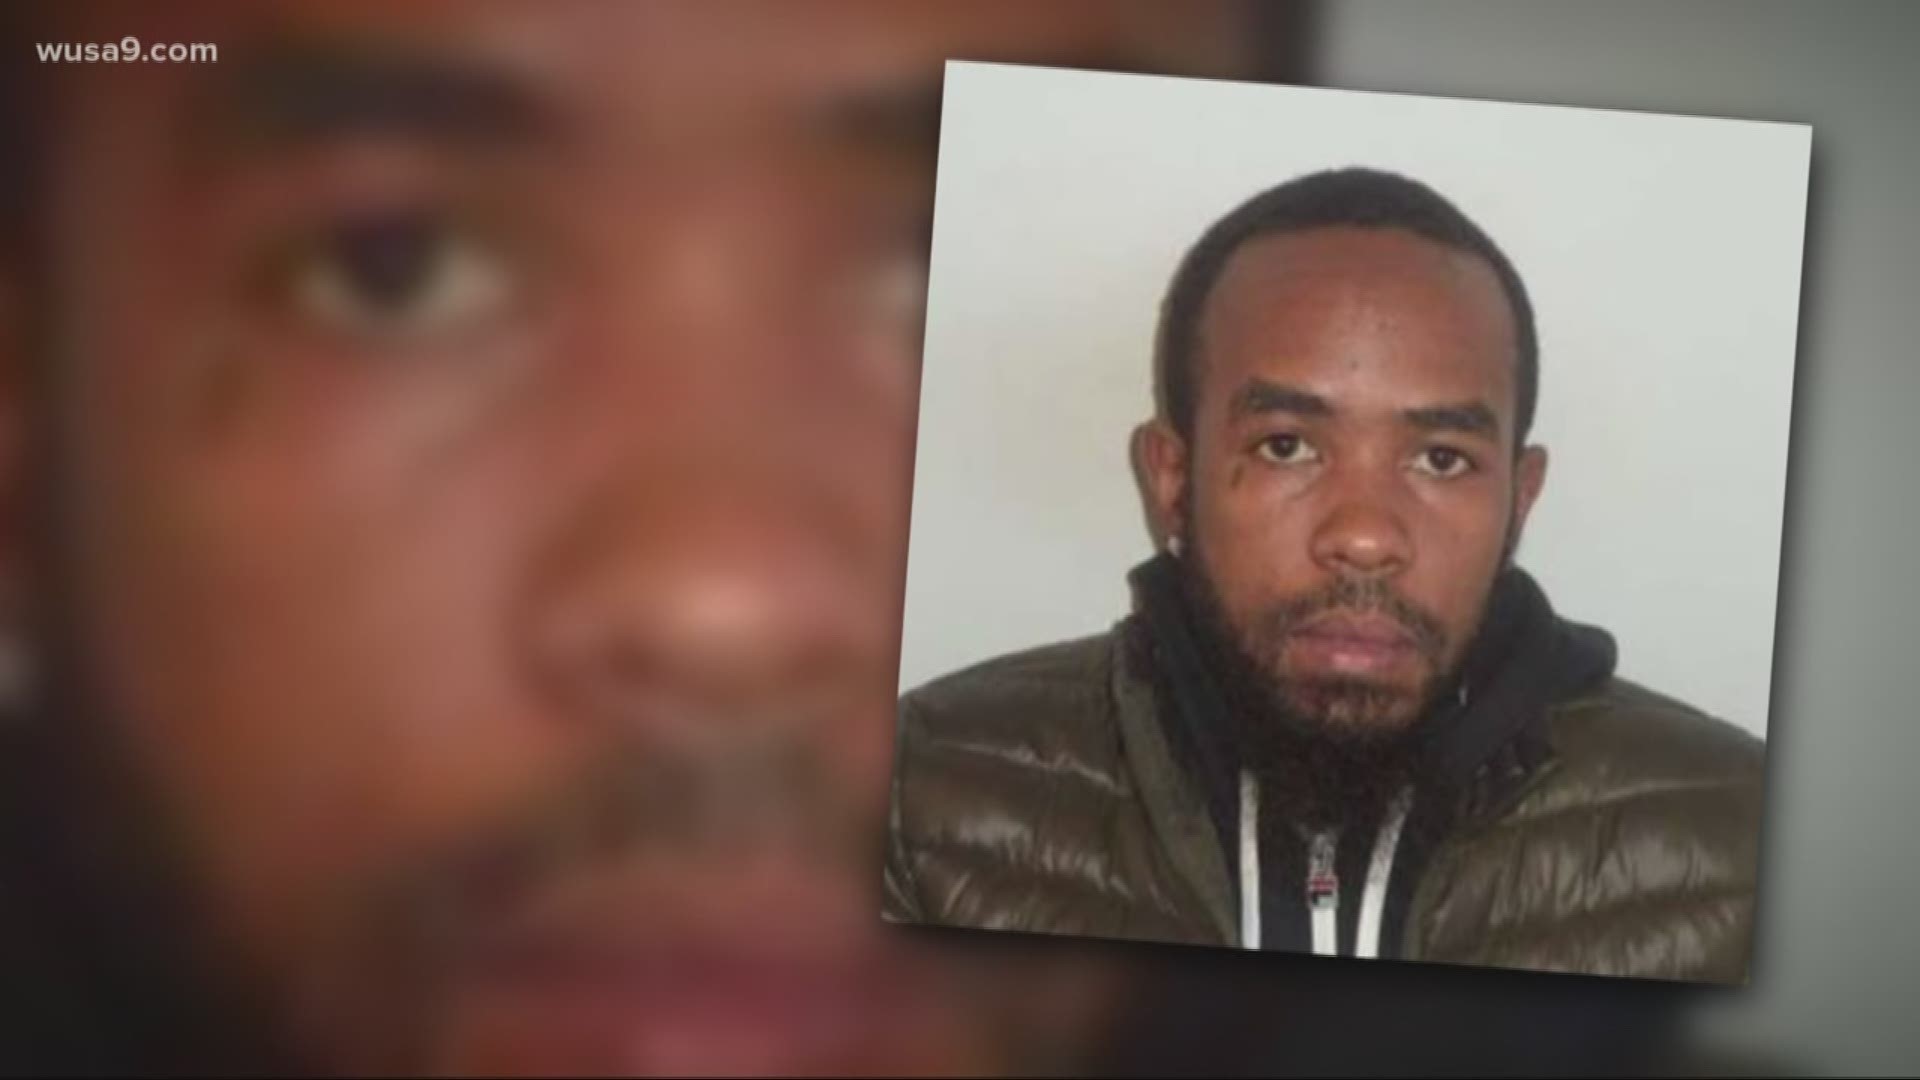 Police have identified the suspect as 30-year-old Ricoh McClain of District Heights, Maryland. Here's how you can help.